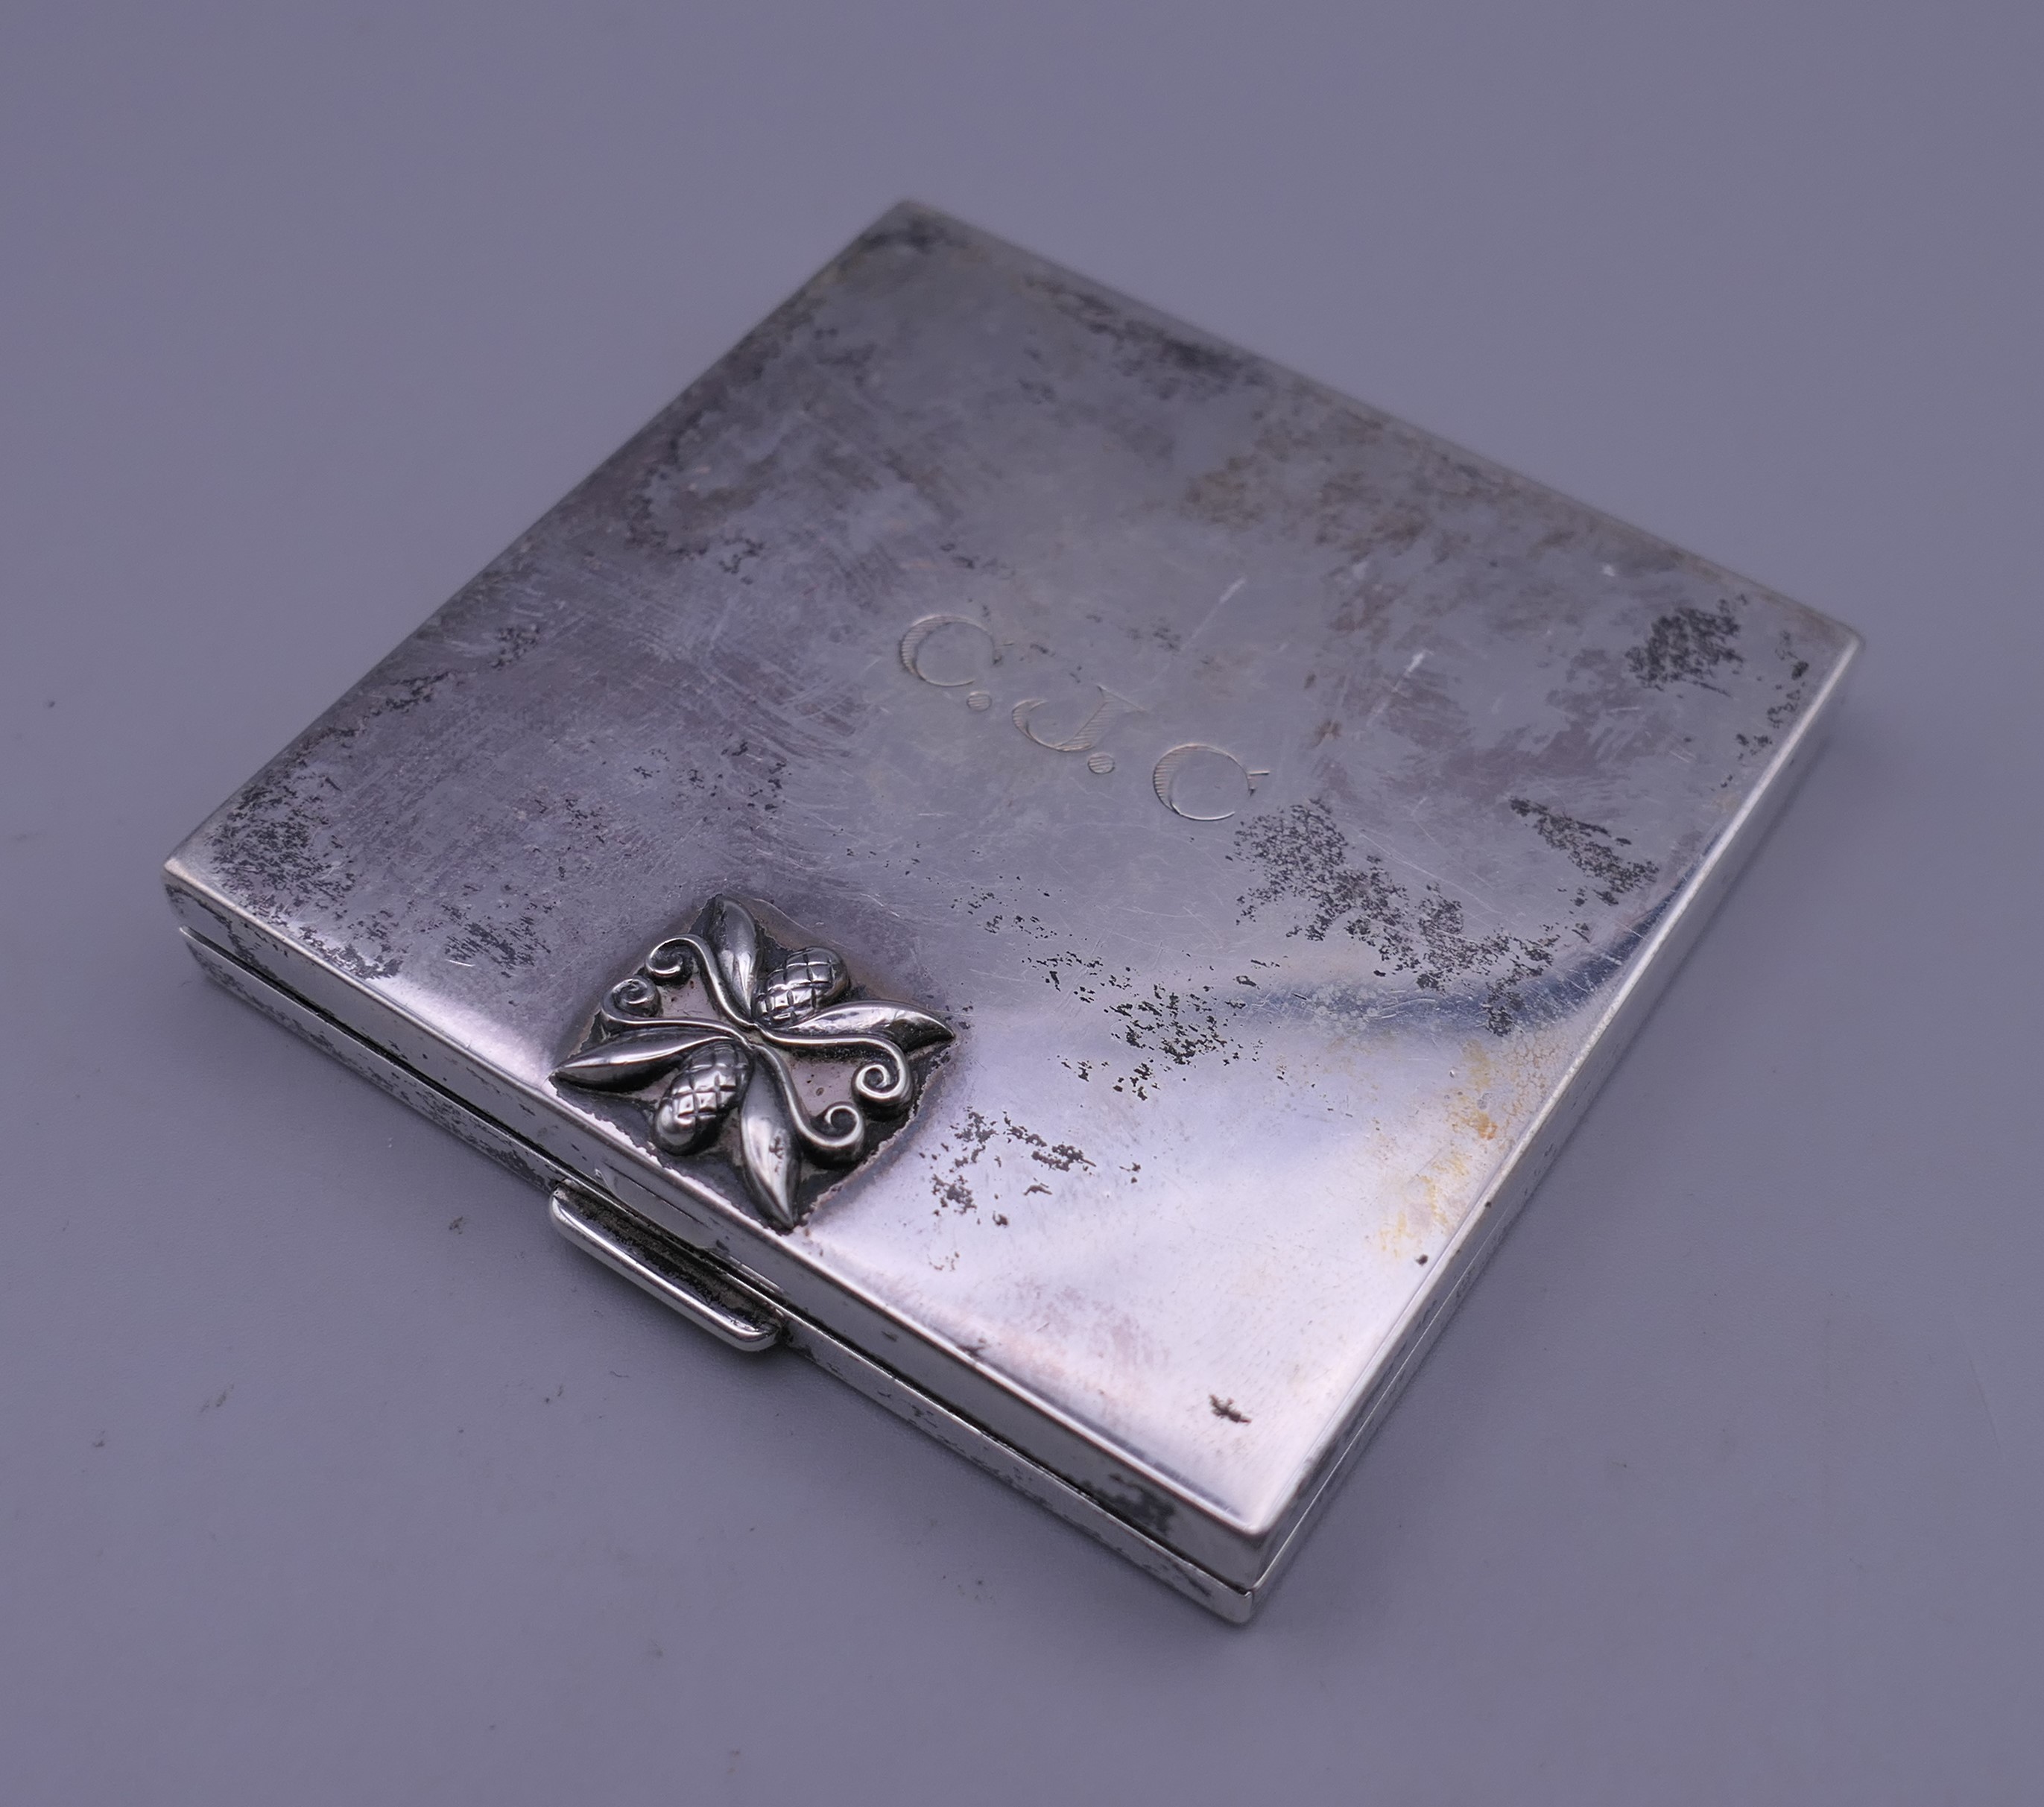 A Georg Jensen sterling silver compact. 7 cm wide.